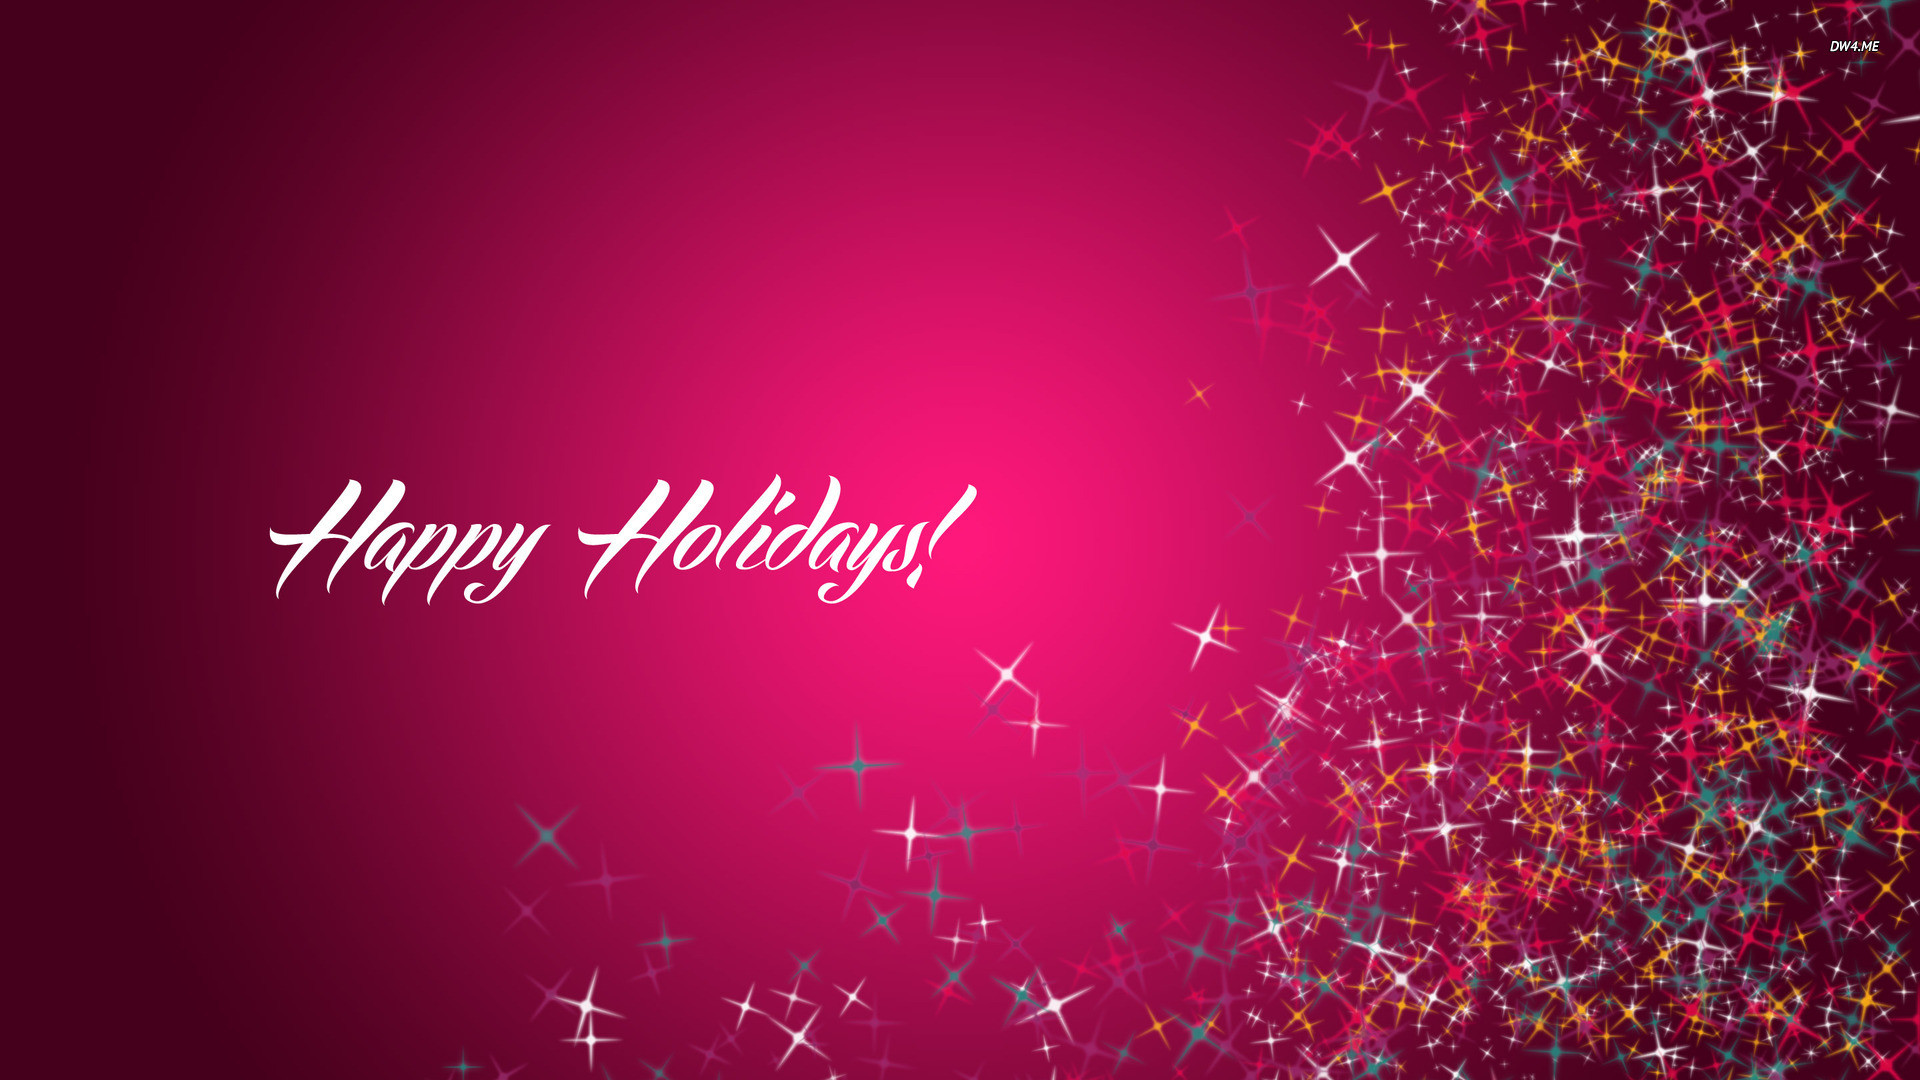 1920x1080 ... Happy Holiday Wallpapers HD Wallpapers, Backgrounds, Images, Art ..